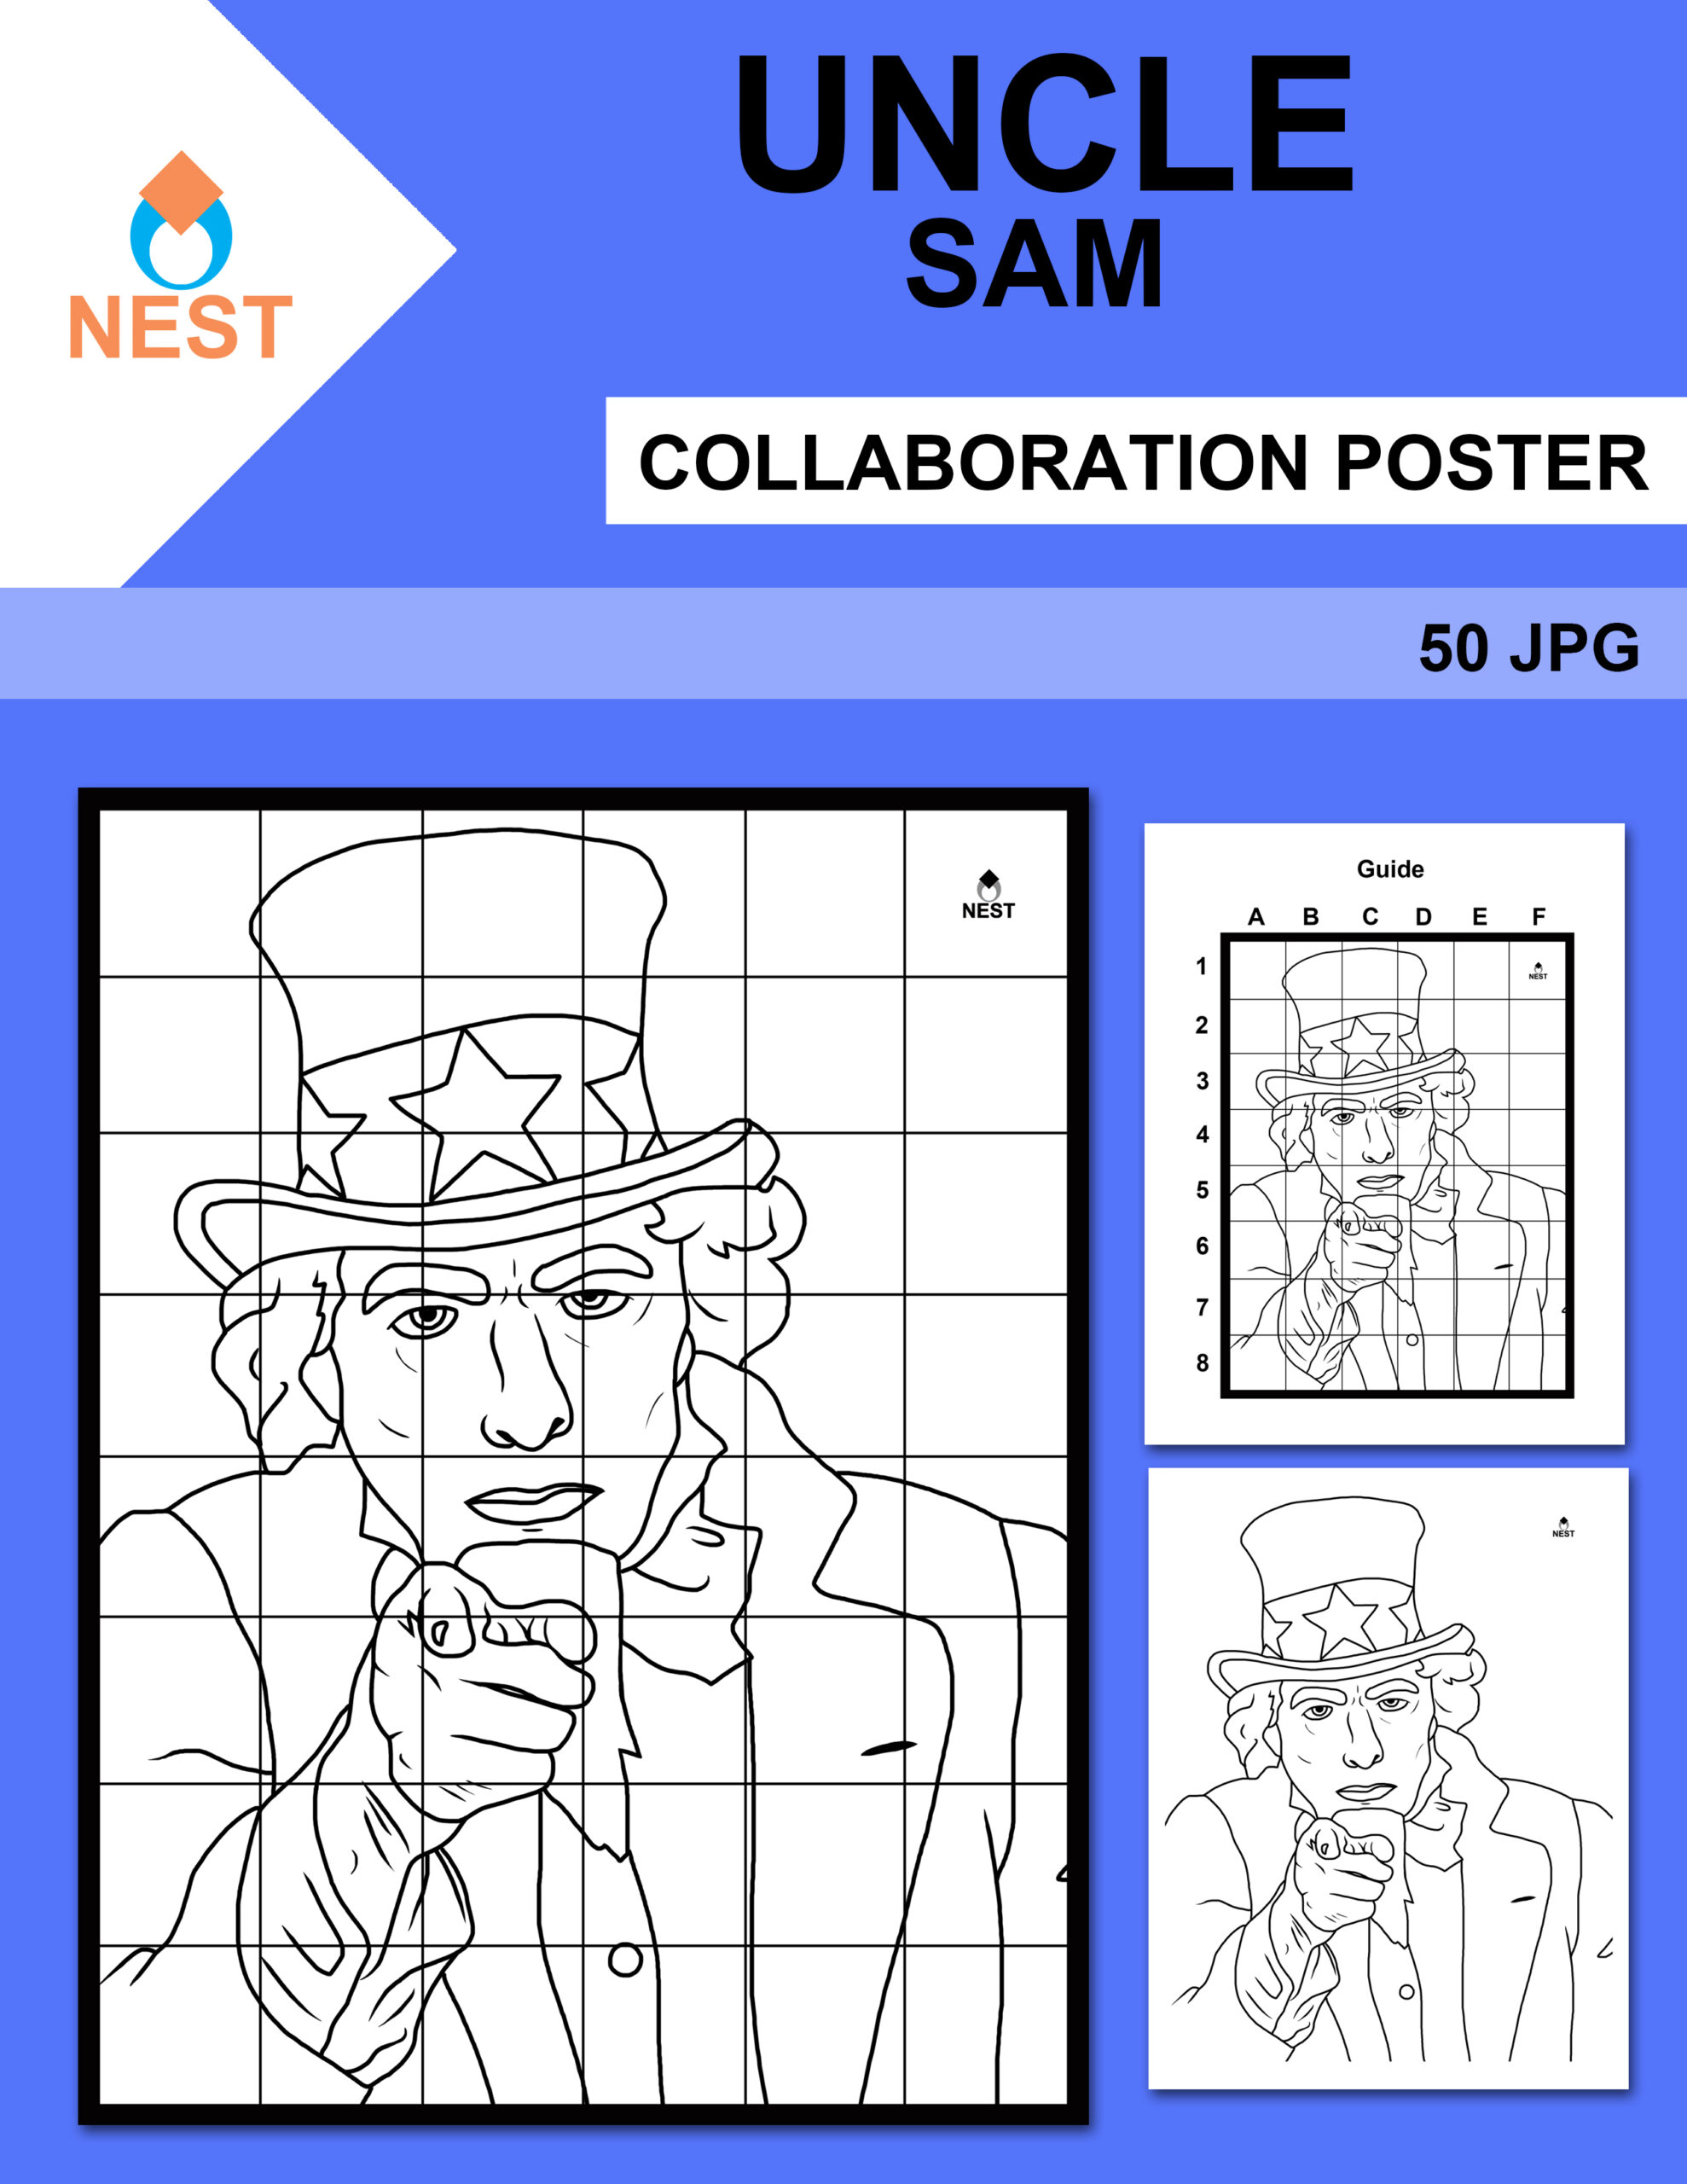 Uncle sam collaboration poster made by teachers